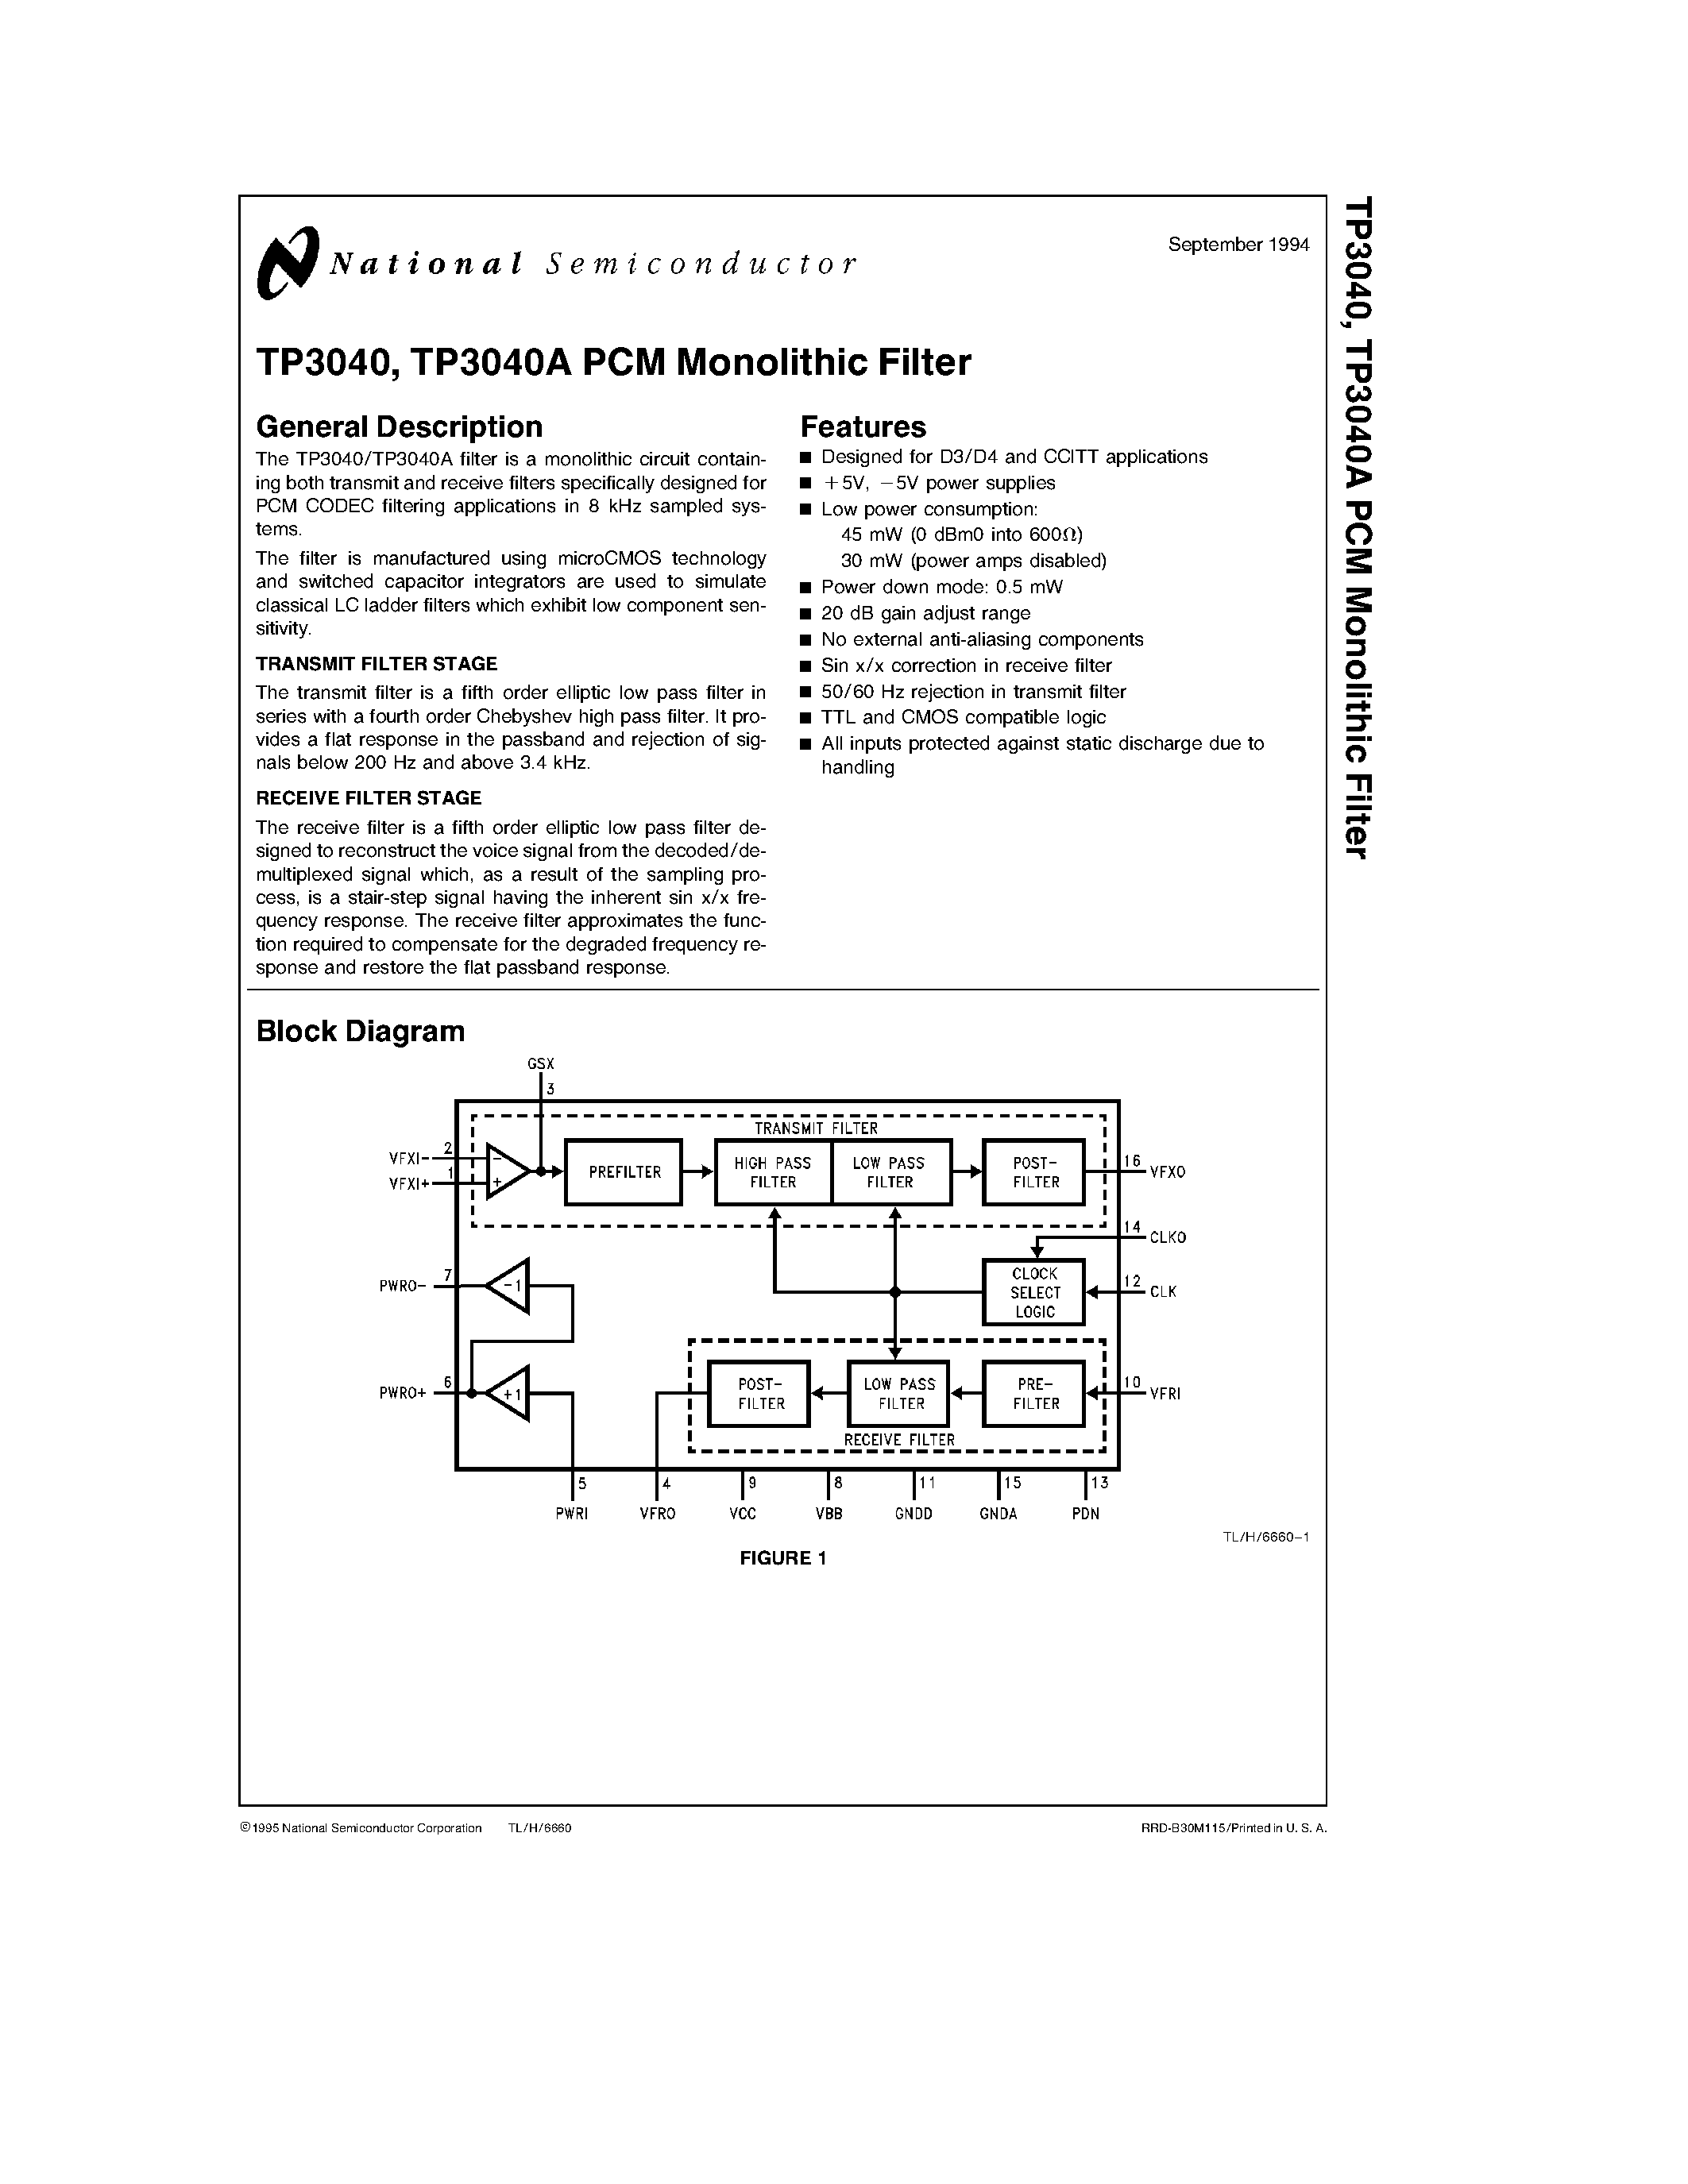 Datasheet TP3040N - TP3040/ TP3040A PCM Monolithic Filter page 1